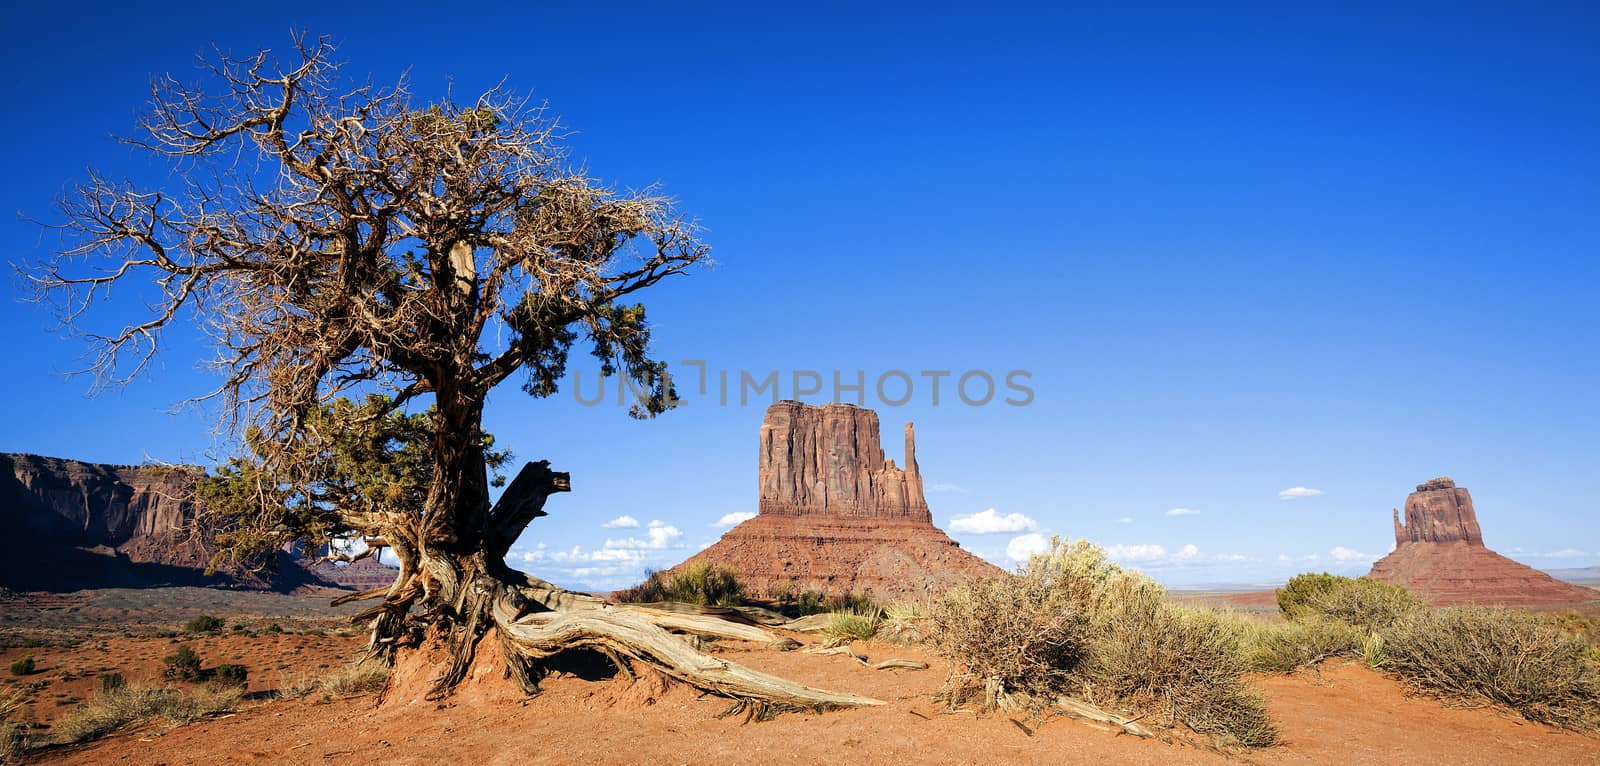 Panoramic view of Monument Valley and tree by vwalakte